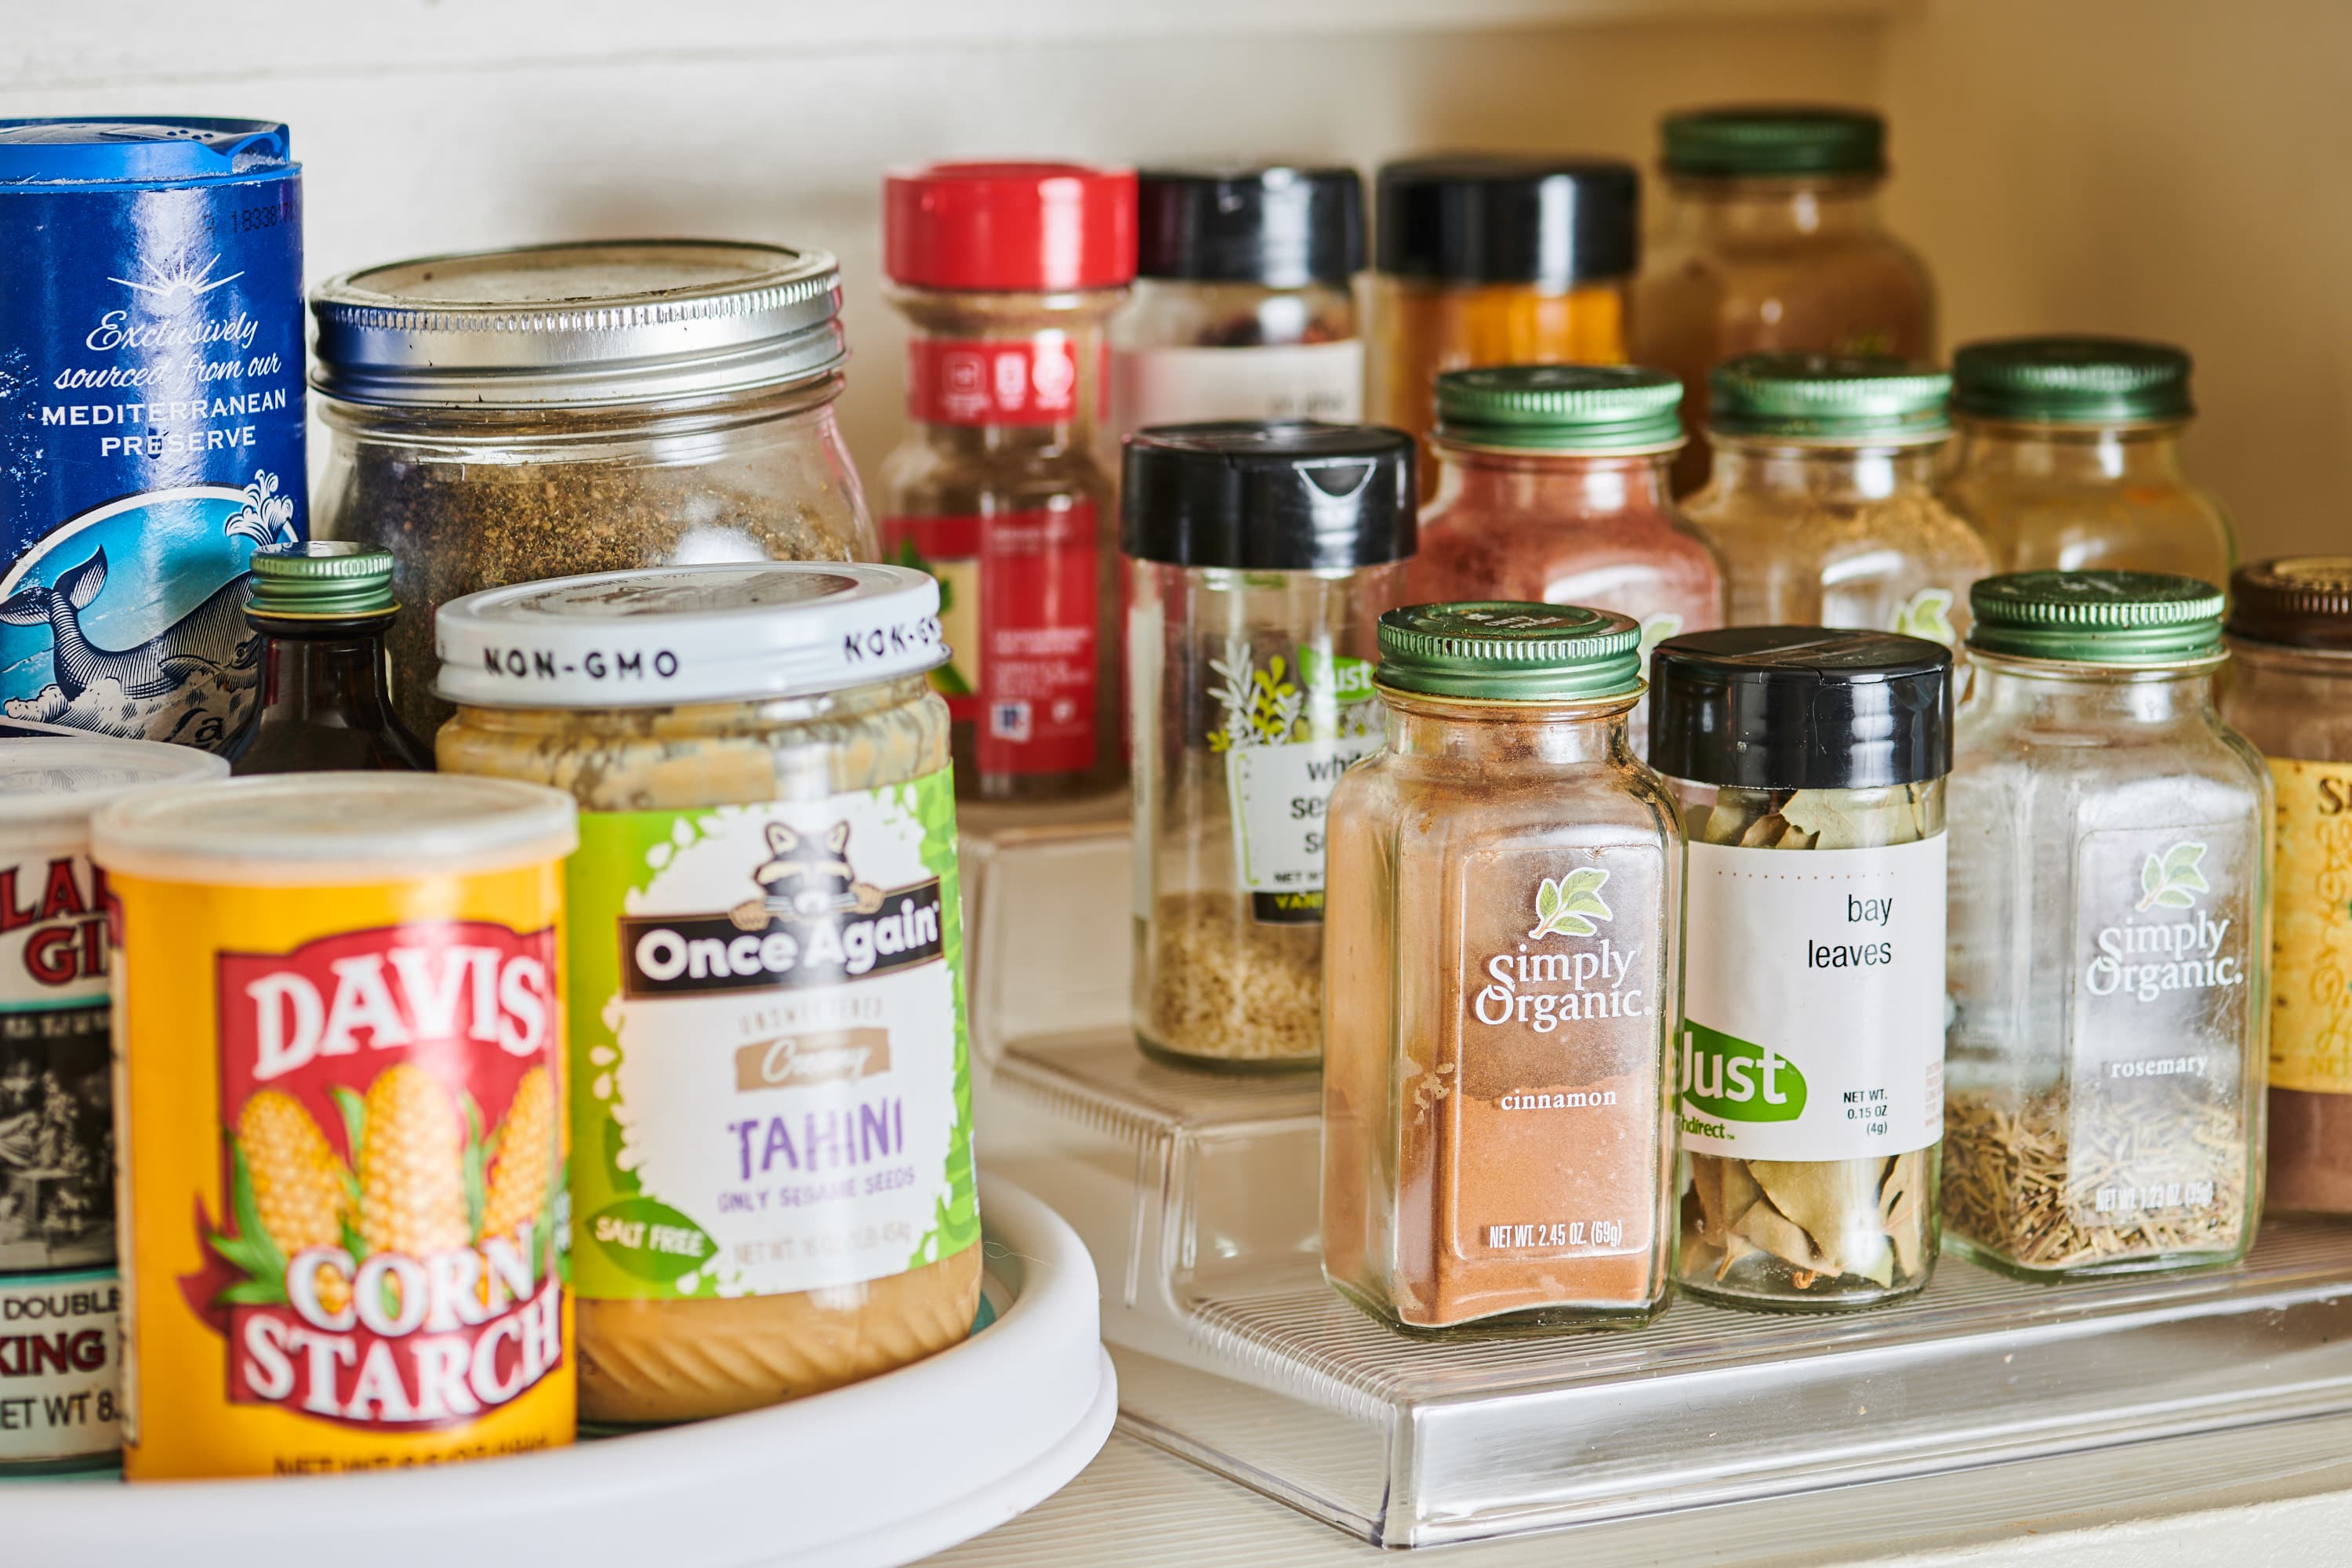 https://cdn.apartmenttherapy.info/image/upload/v1585945794/k/Photo/Lifestyle/2020-04-Pantry-Organizers-For-Just-%2410-or-Less/TK-Pantry-Organizers-We-Love-For-Just-_10-or-Less589.jpg